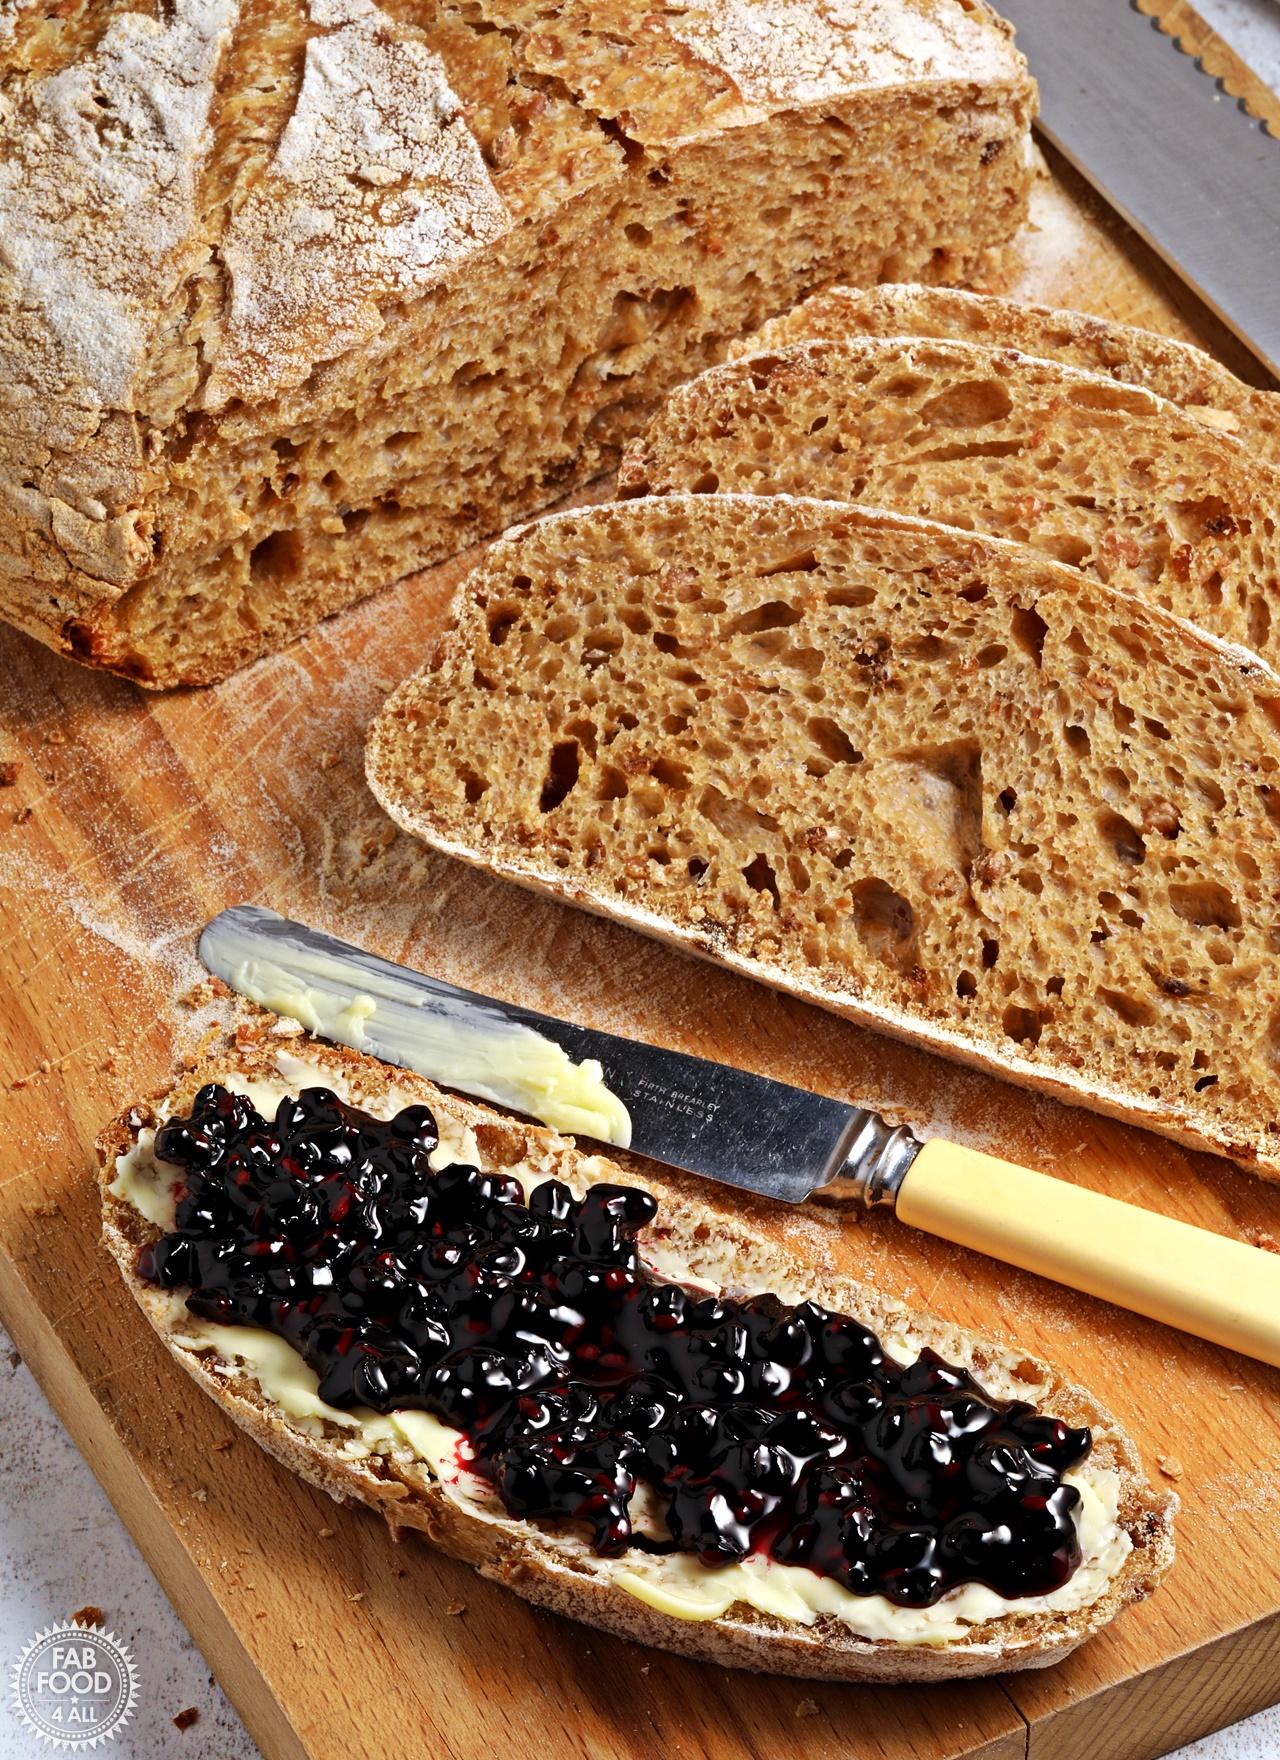 Sliced malted grain sourdough loaf with one slice spread with butter and jam.